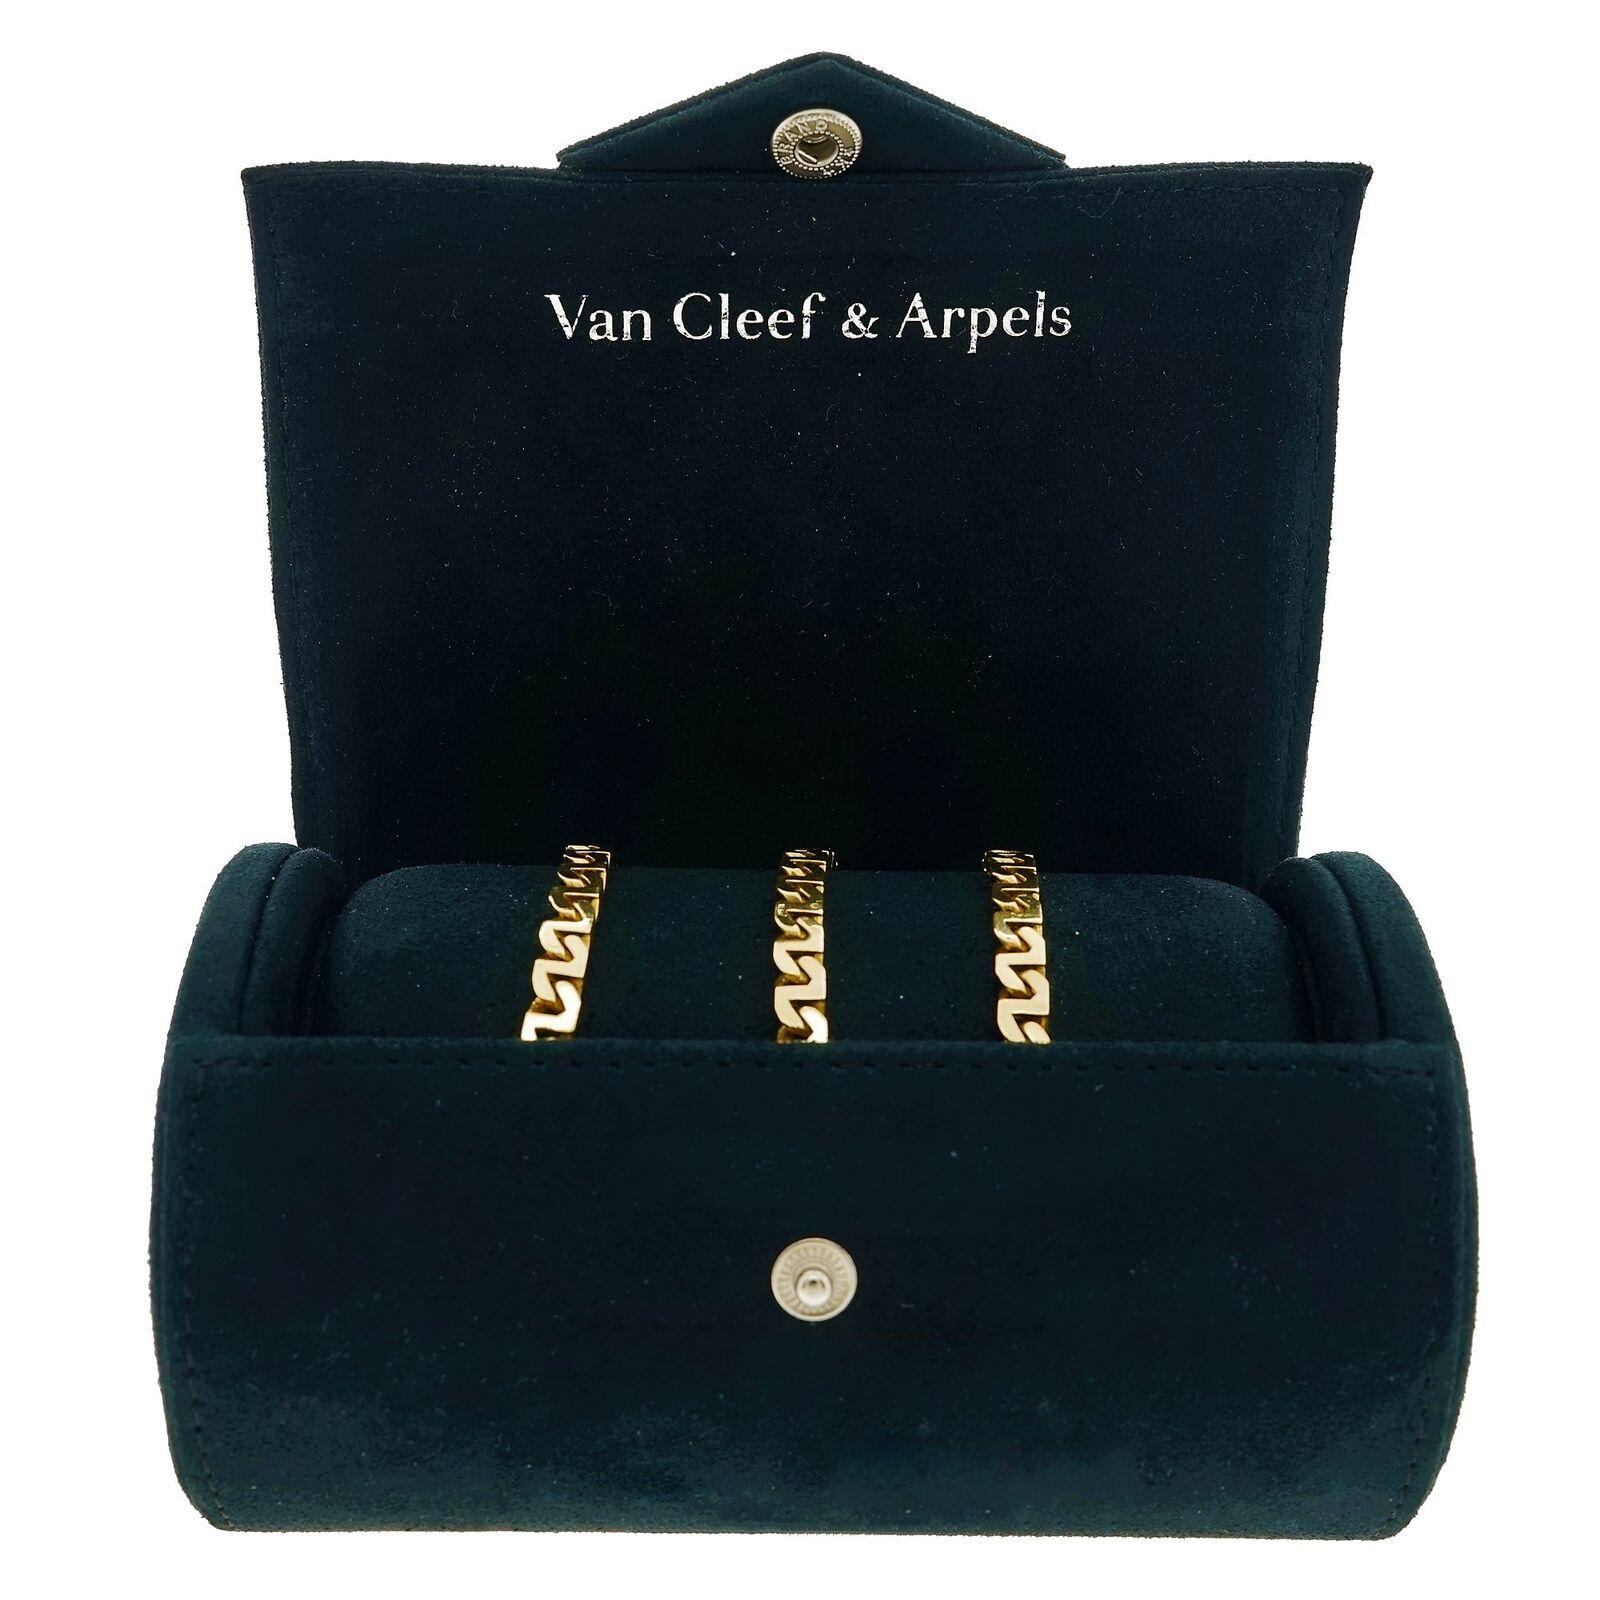 Details & Condition: A rare and highly sought after Van Cleef & Arpels 18k Yellow gold men's necklace.
This piece is 24 inches long and weighs 77.30 Grams / 49.70 Pennyweight and is solid throughout.
Crafted in the mid 1970's this was part of a